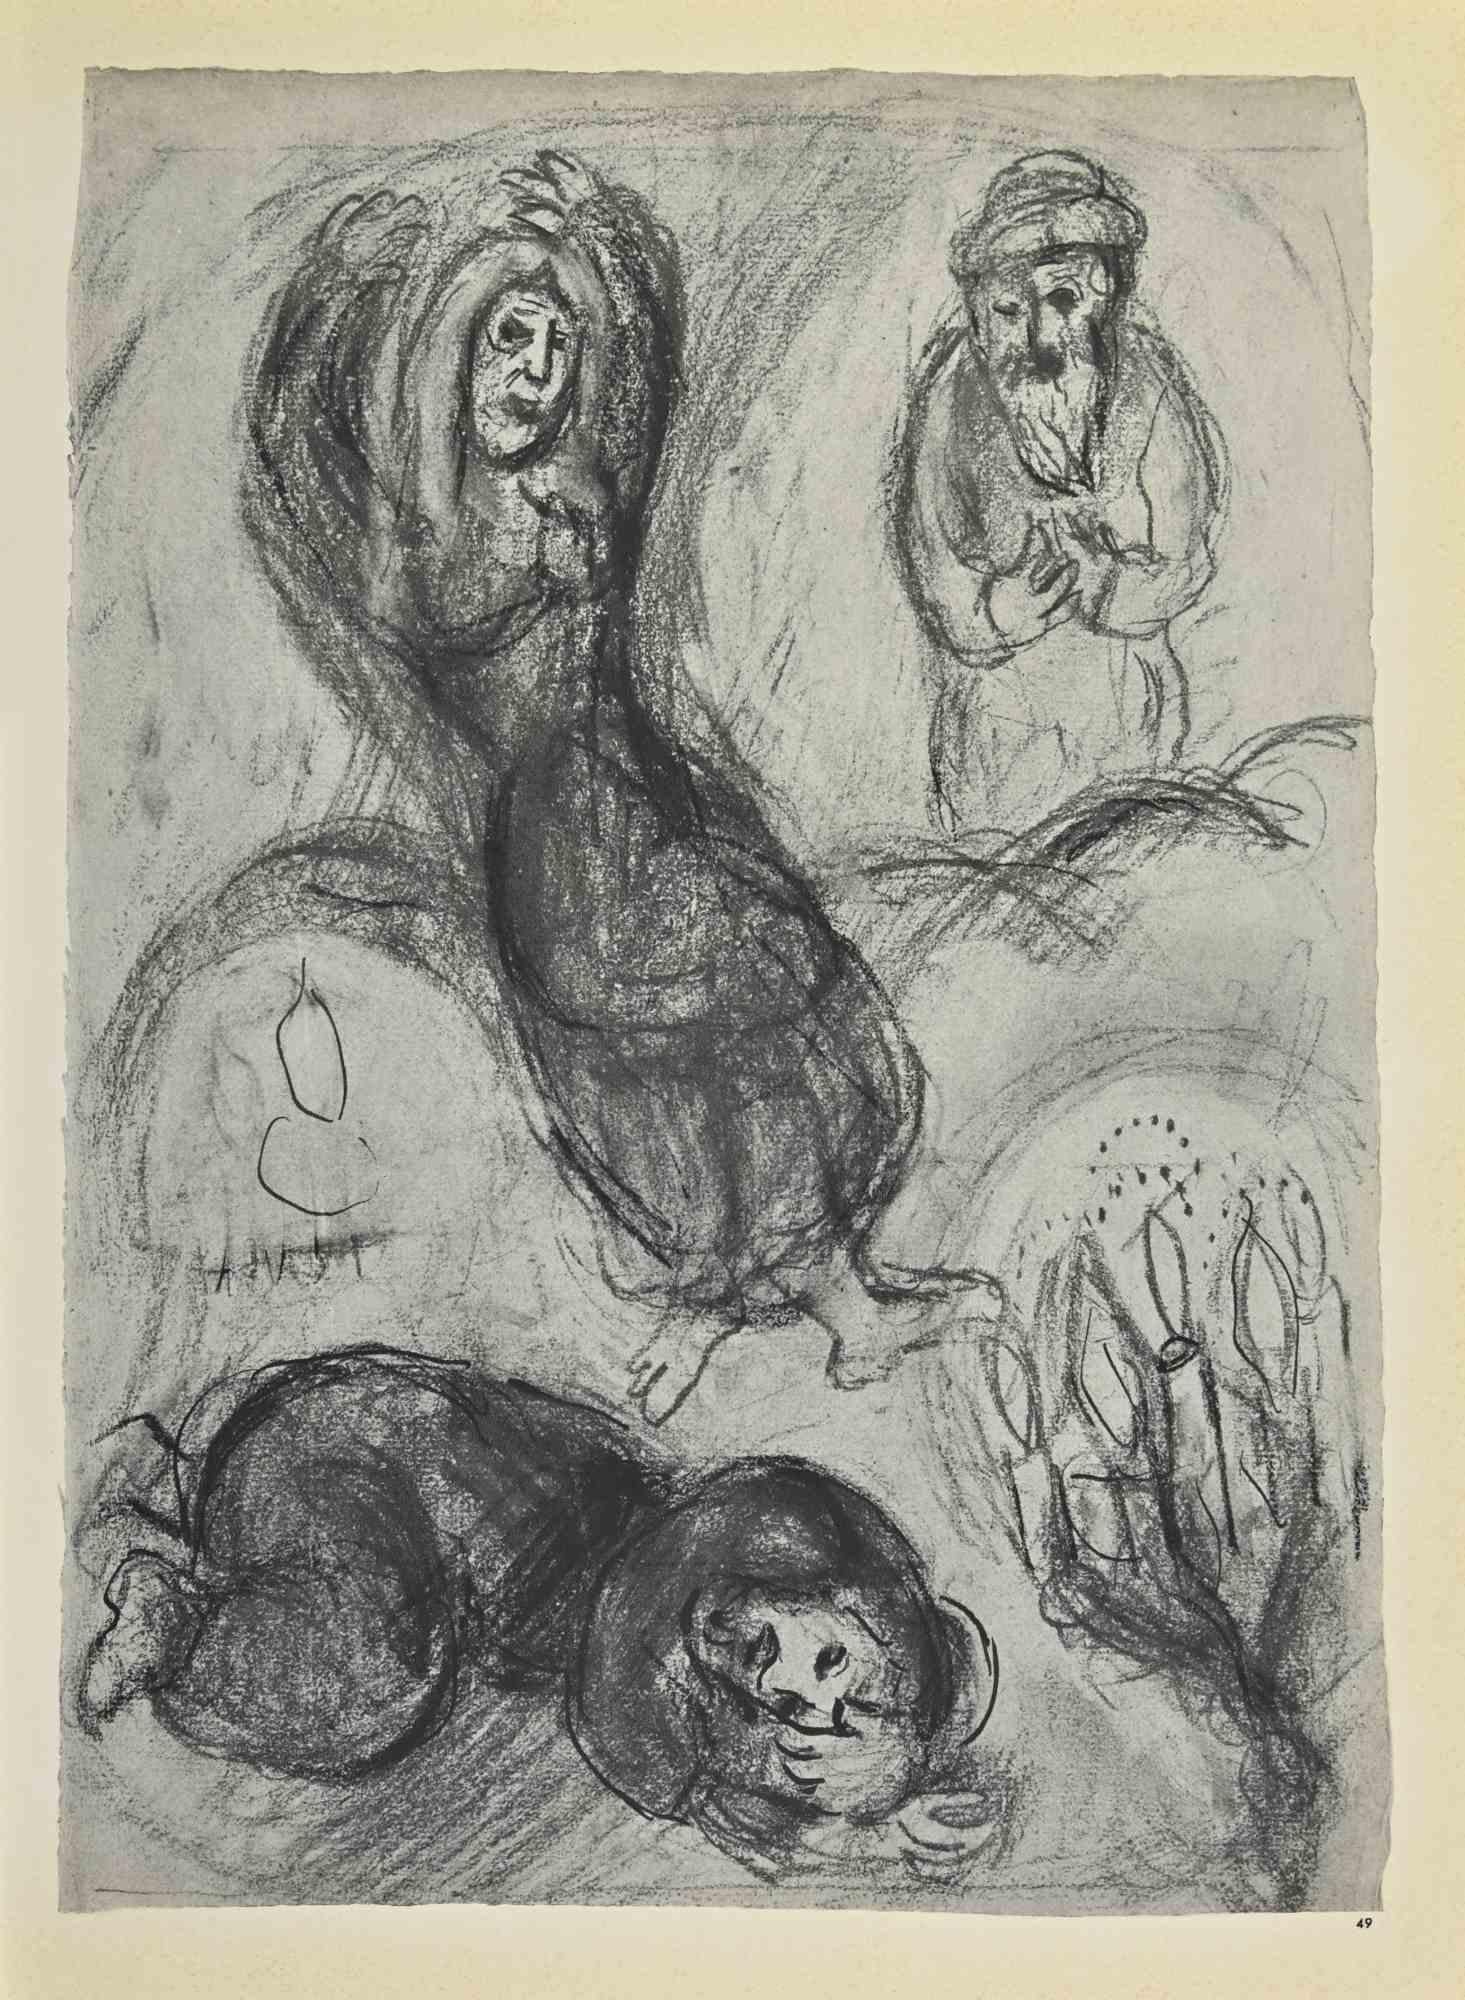 Amnon And Tamar is an artwork realized by March Chagall, 1960s.

Lithograph on brown-toned paper, no signature.

Lithograph on both sheets.

Edition of 6500 unsigned lithographs. Printed by Mourlot and published by Tériade, Paris.

Ref. Mourlot, F.,